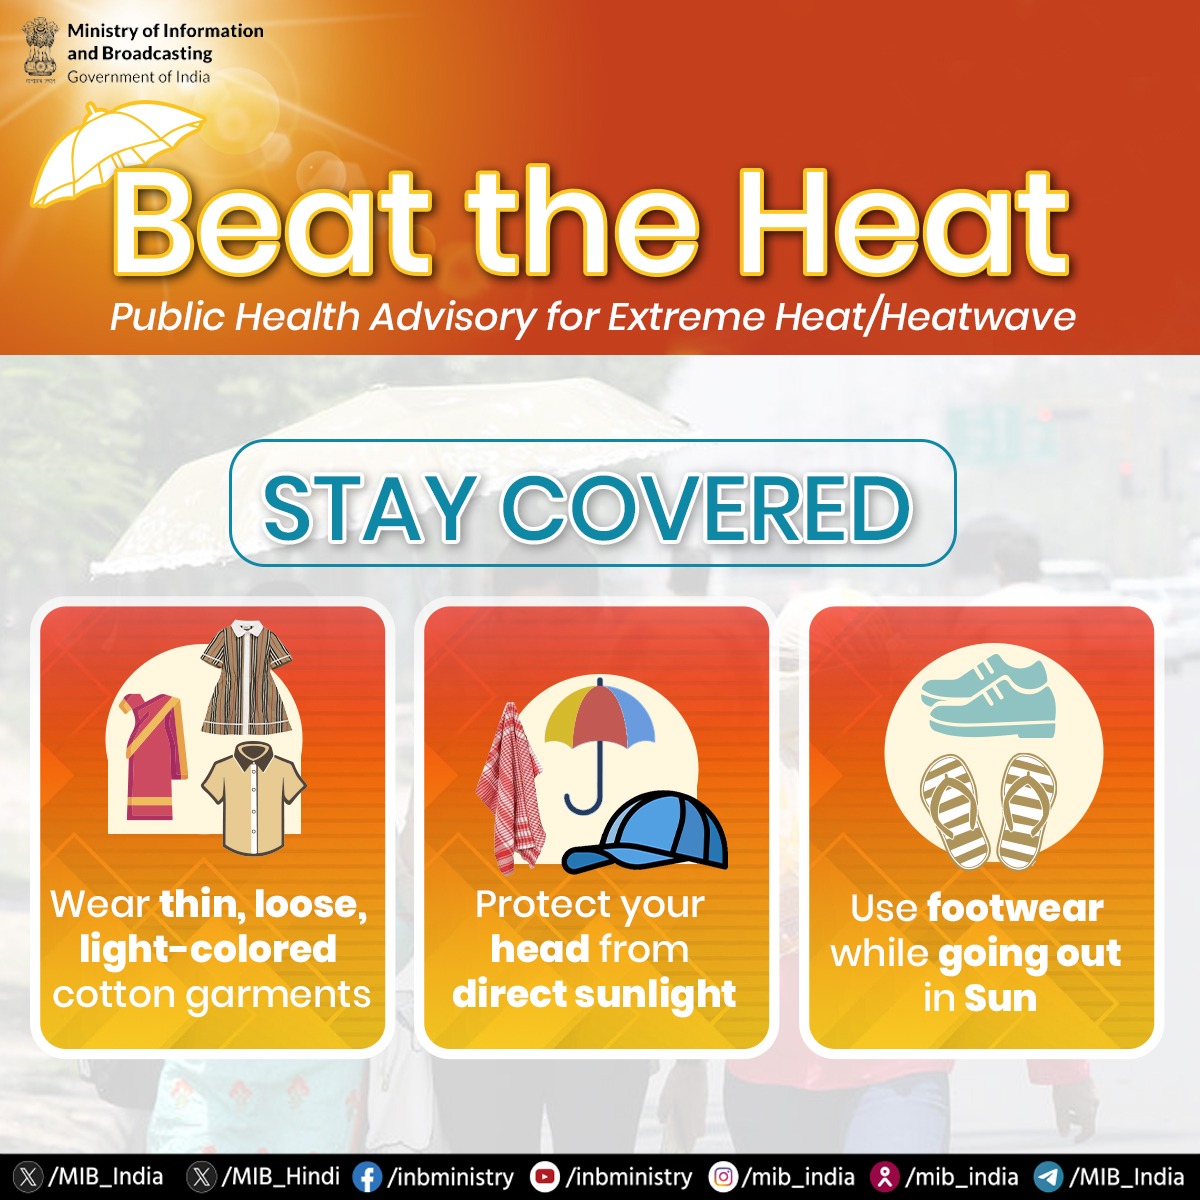 #HeatWave: Beat the Heat! 📝Public Health Advisory for Extreme Heat/Heatwave☀️ ➡️Stay Covered: 💠Wear thin, loose, light-colored cotton garments👕🥻 💠Protect your head from direct sunlight🧢🌂 💠Use footwear while going out in Sun🩴👟 Stay safe & be #WeatherReady!